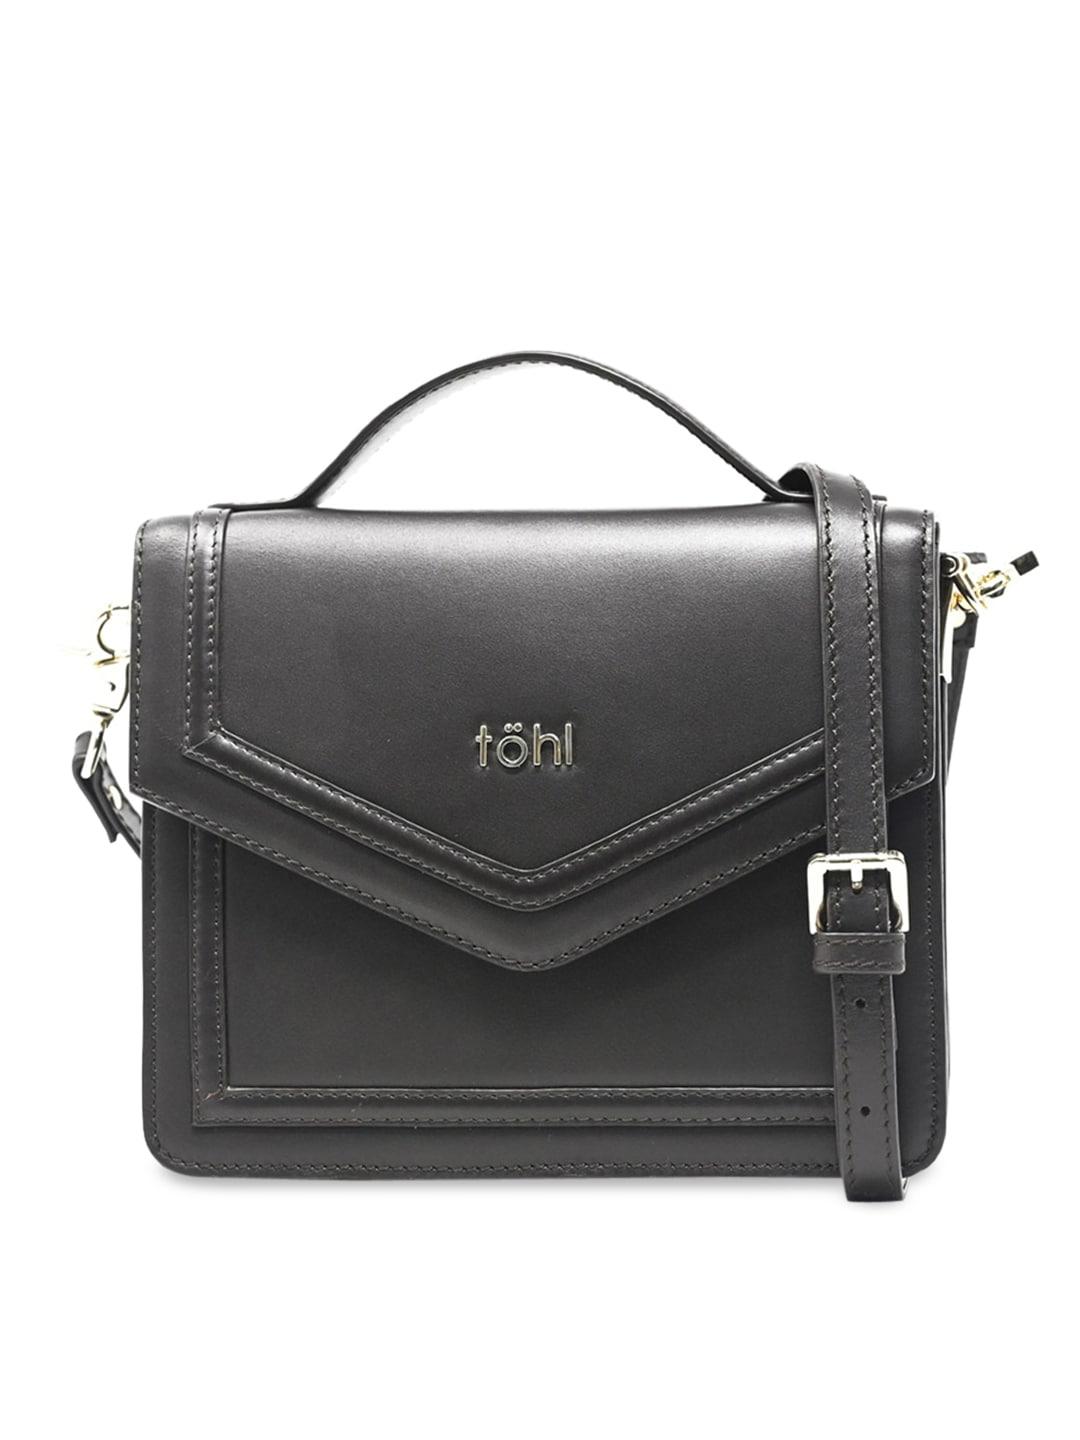 tohl black leather structured satchel